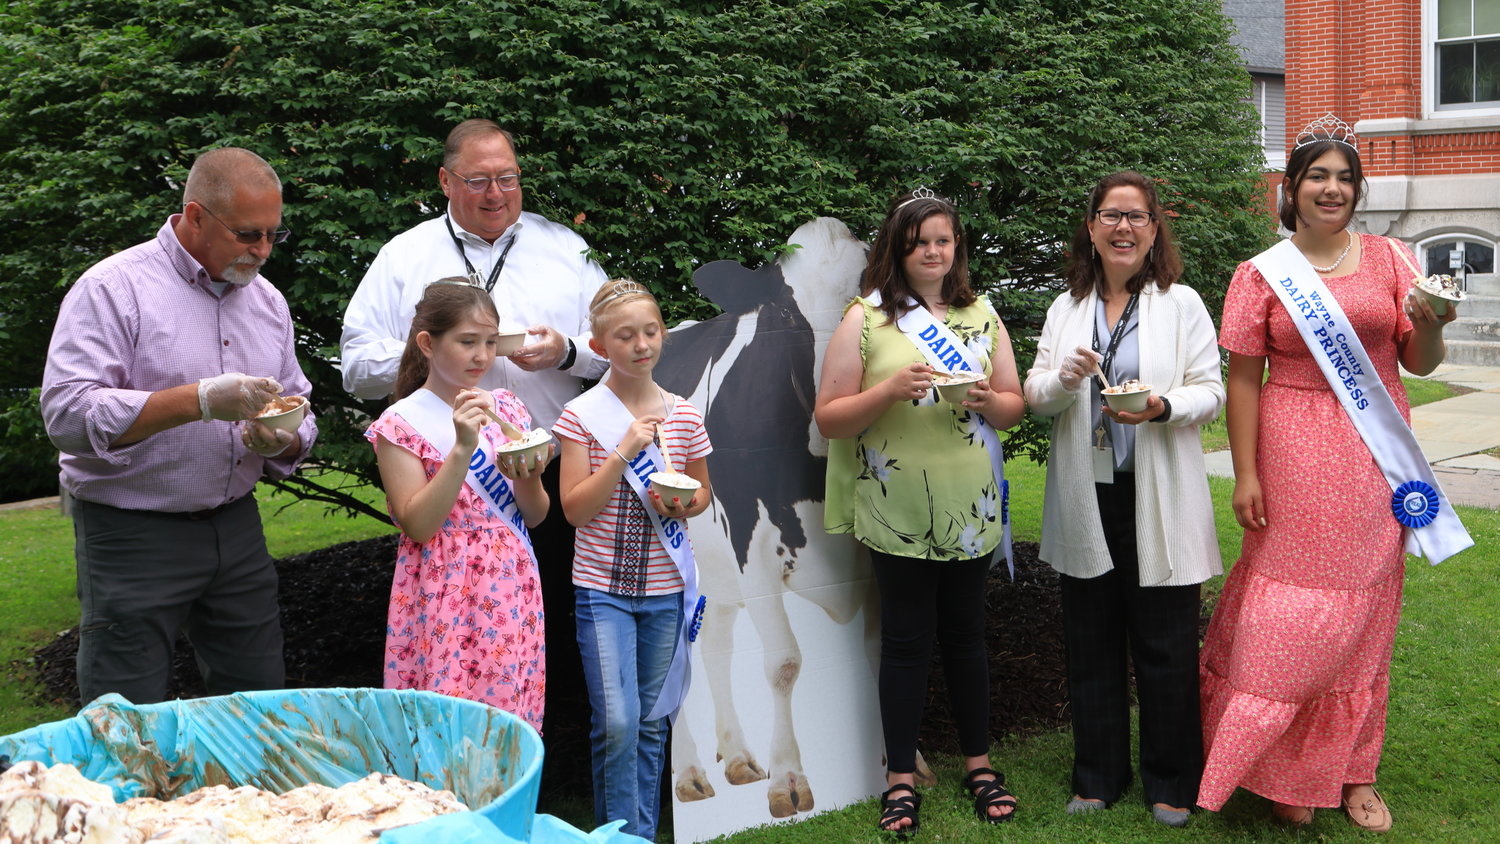 The Wayne County Commissioners were very good sports about loosing the ice cream sundae building competition to the Wayne County Dairy Princess team and everyone shared in the bounty of Wayne County made ice cream from Creamworks Creamery. From left: Commissioner Brian Smith, Dairy Miss Zoe Tyler, commissioner Joseph Adams, Dairy Miss Chloe Tyler, Dairy Miss Kenley Roberts, commissioner Jocelyn Cramer and 2022 Wayne County Dairy Princess Elektra Kahagias Dairy Princess.